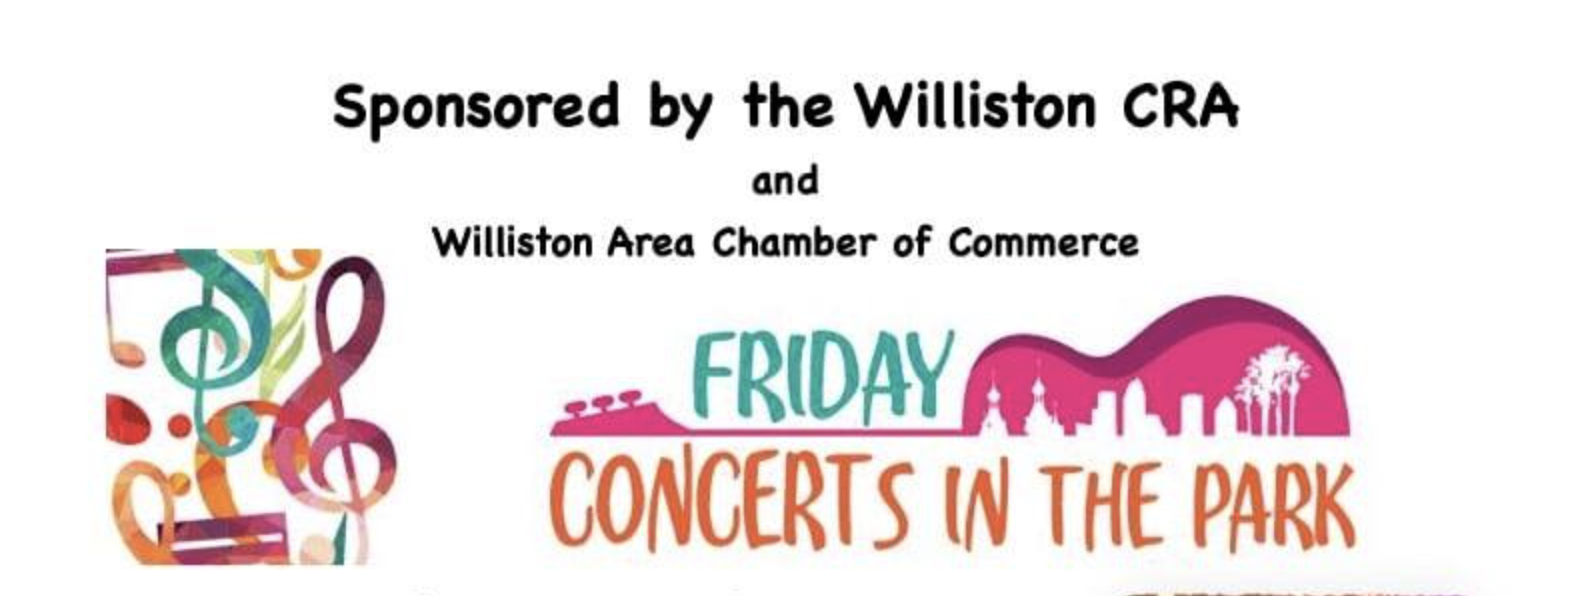 Friday Concerts in the Park